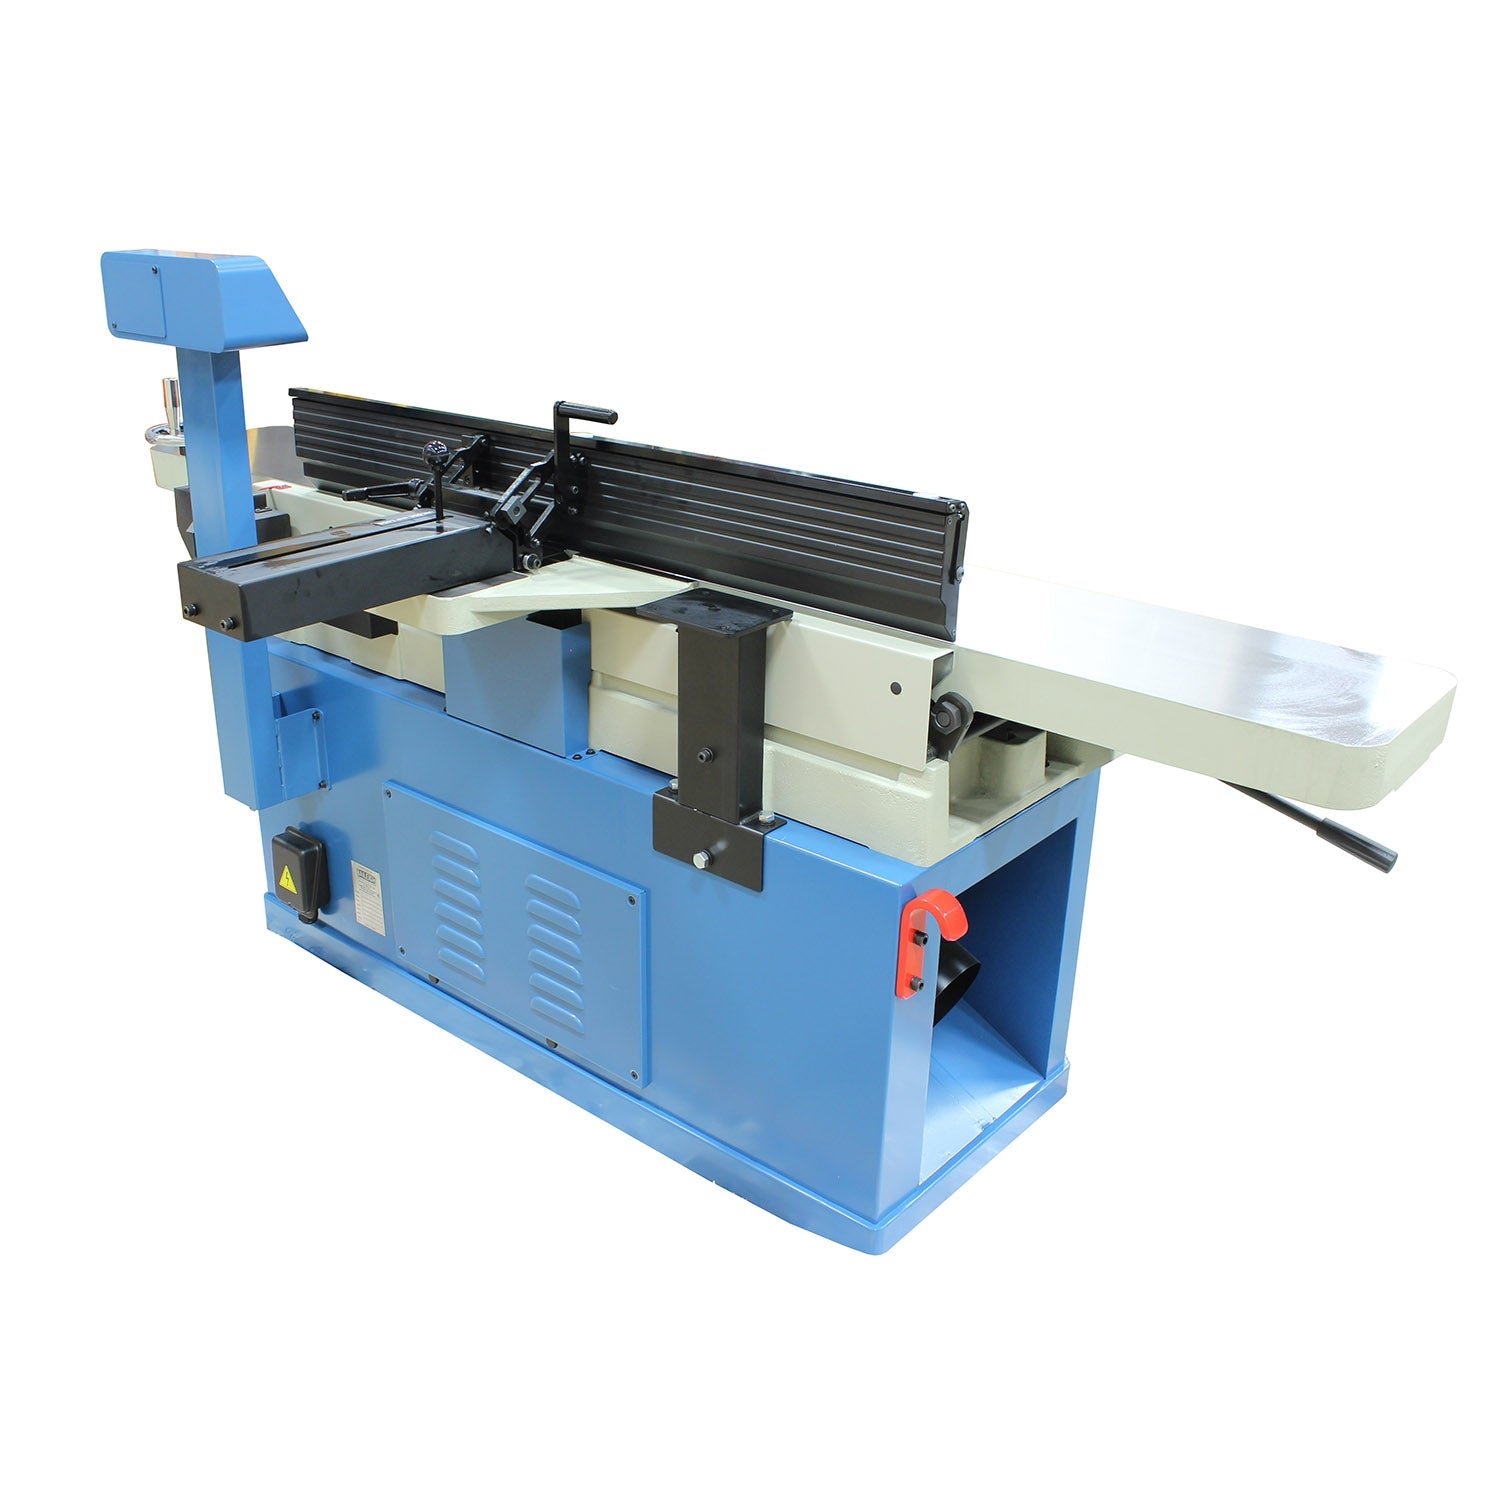 Baileigh IJ-1288P-HH 230V 1 Phase 5hp 12" Parallelogram Jointer, 88" Table Length, 5500 rpm, 4" Helical Insert Head